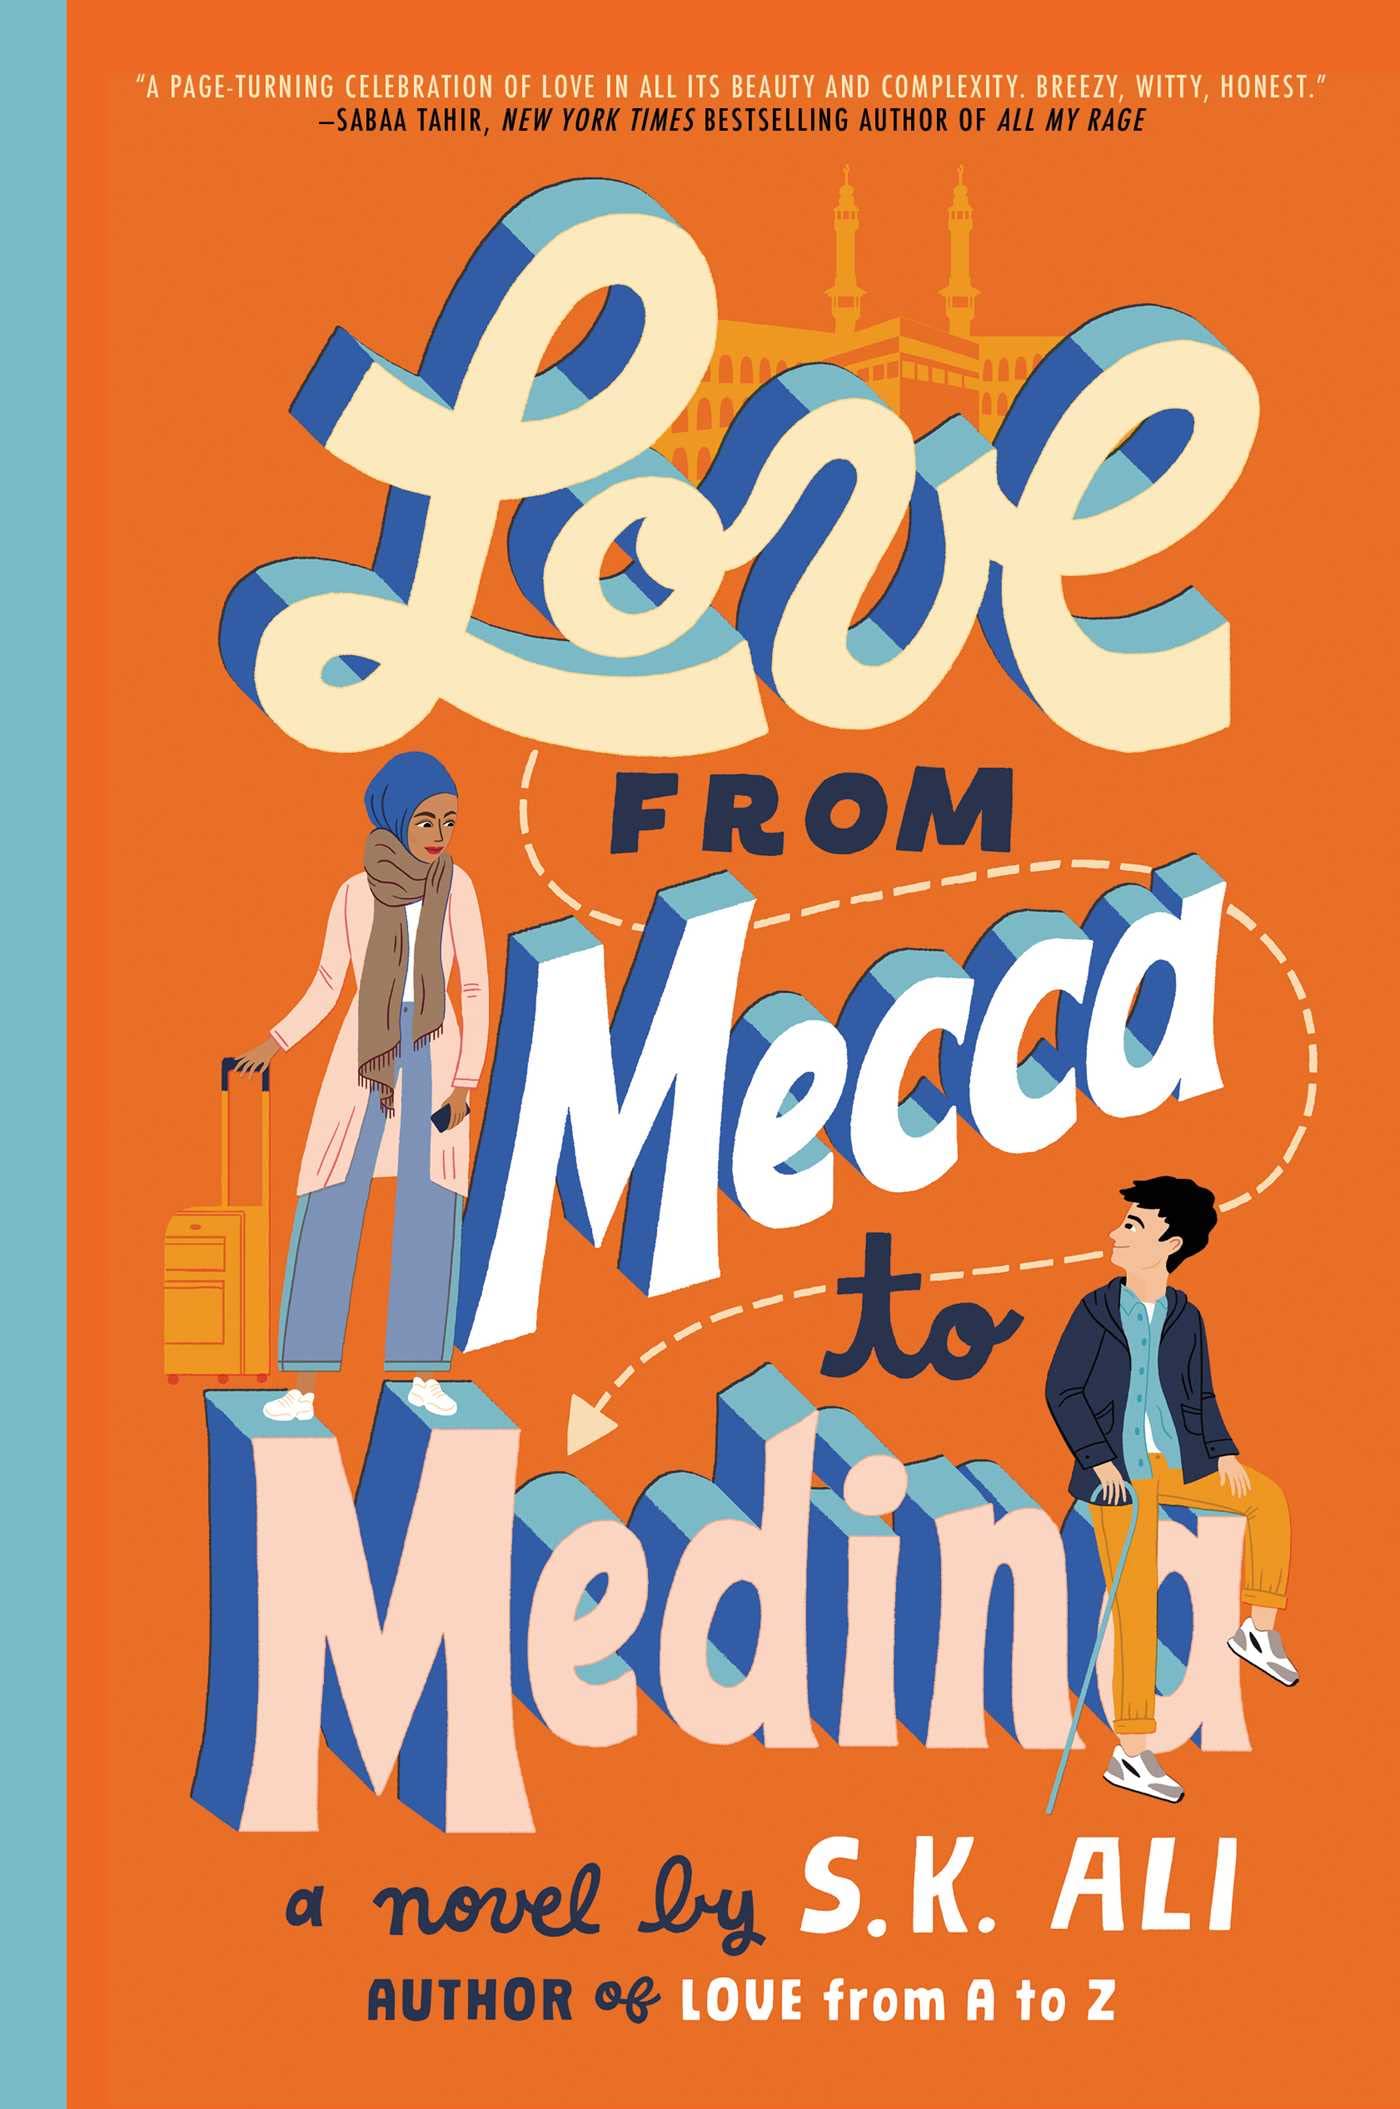 Cover of “Love from Mecca to Medina” by S.K. Ali